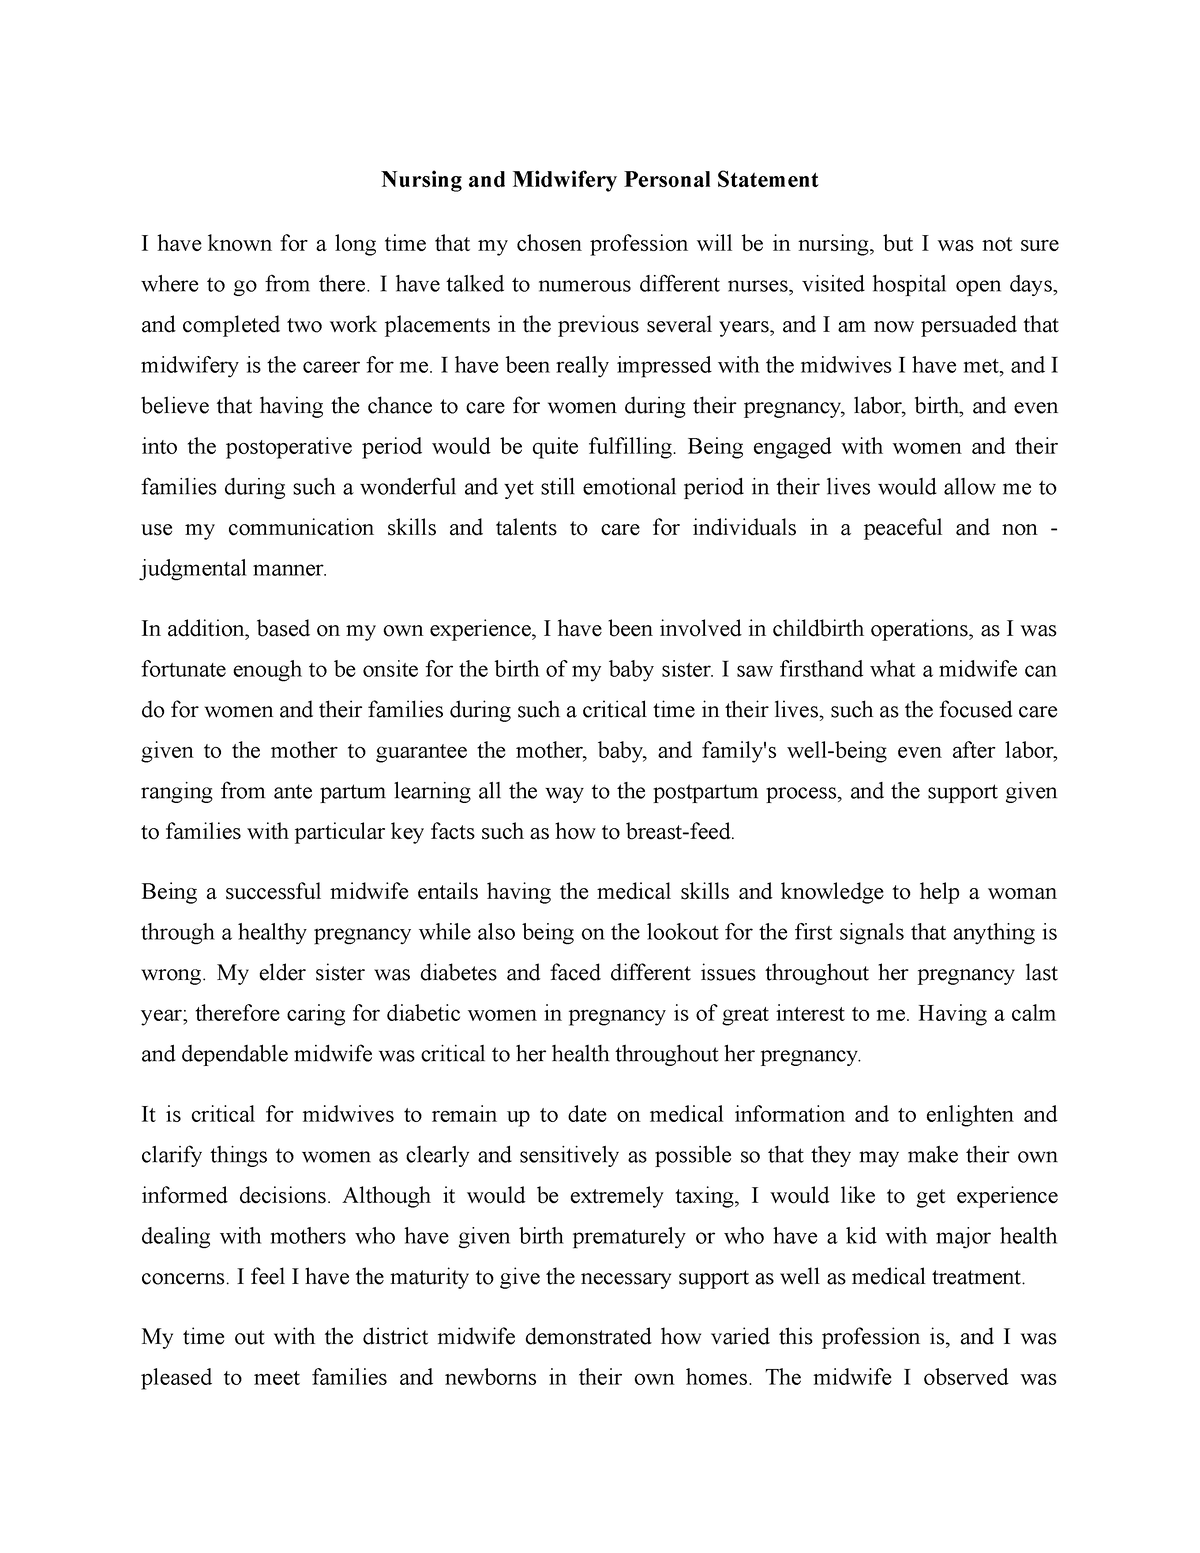 midwifery personal statement for band 5